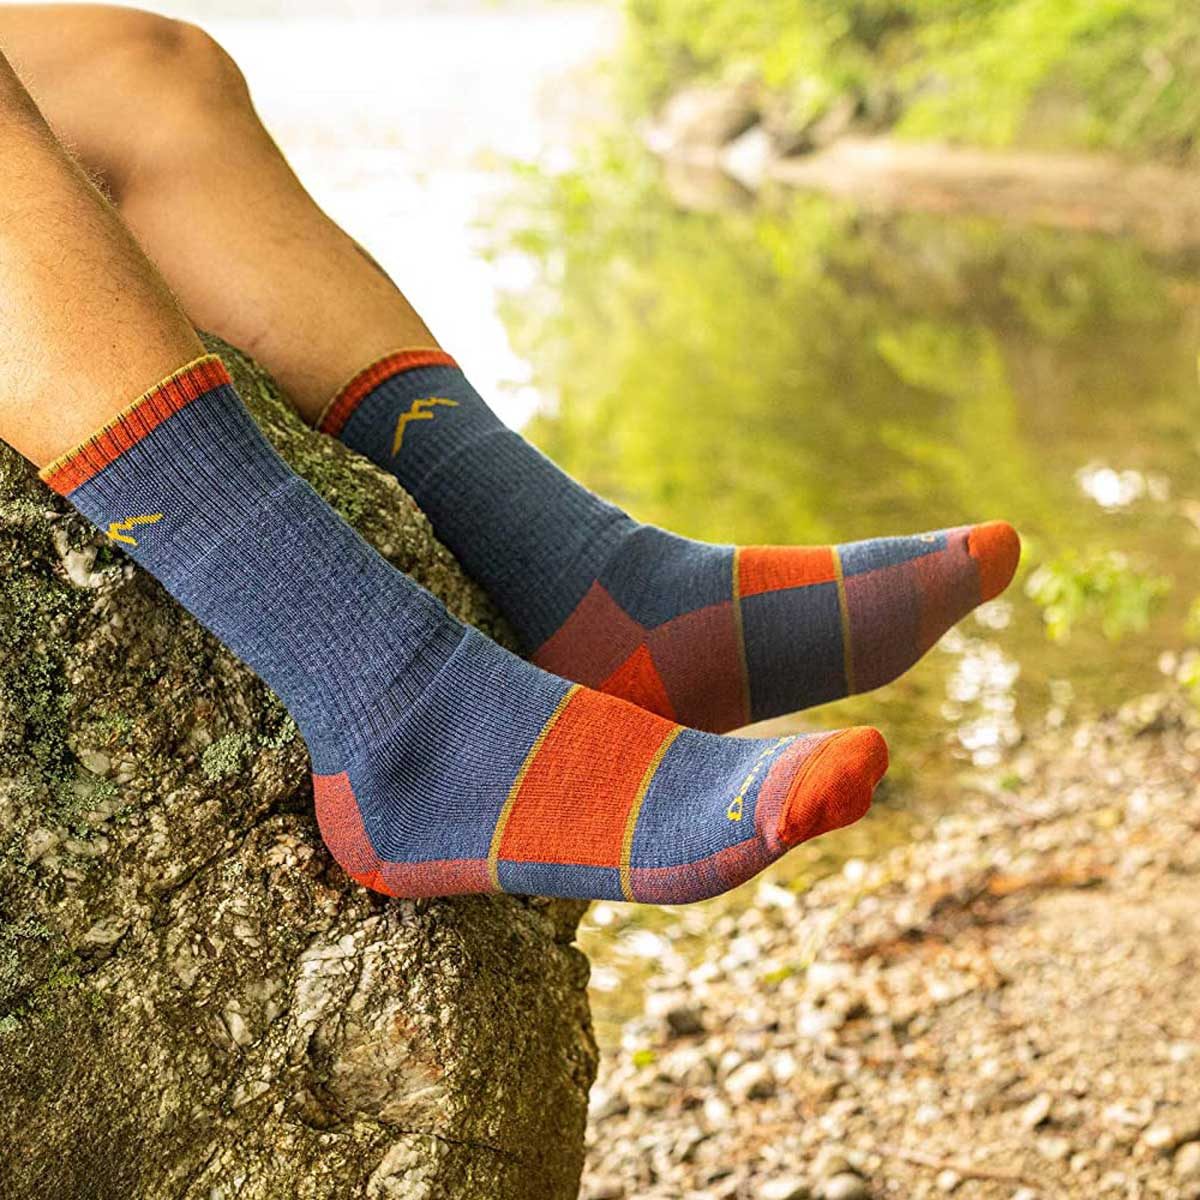 10 Best Work Socks for Heavy-Duty Jobs and Activities 2023